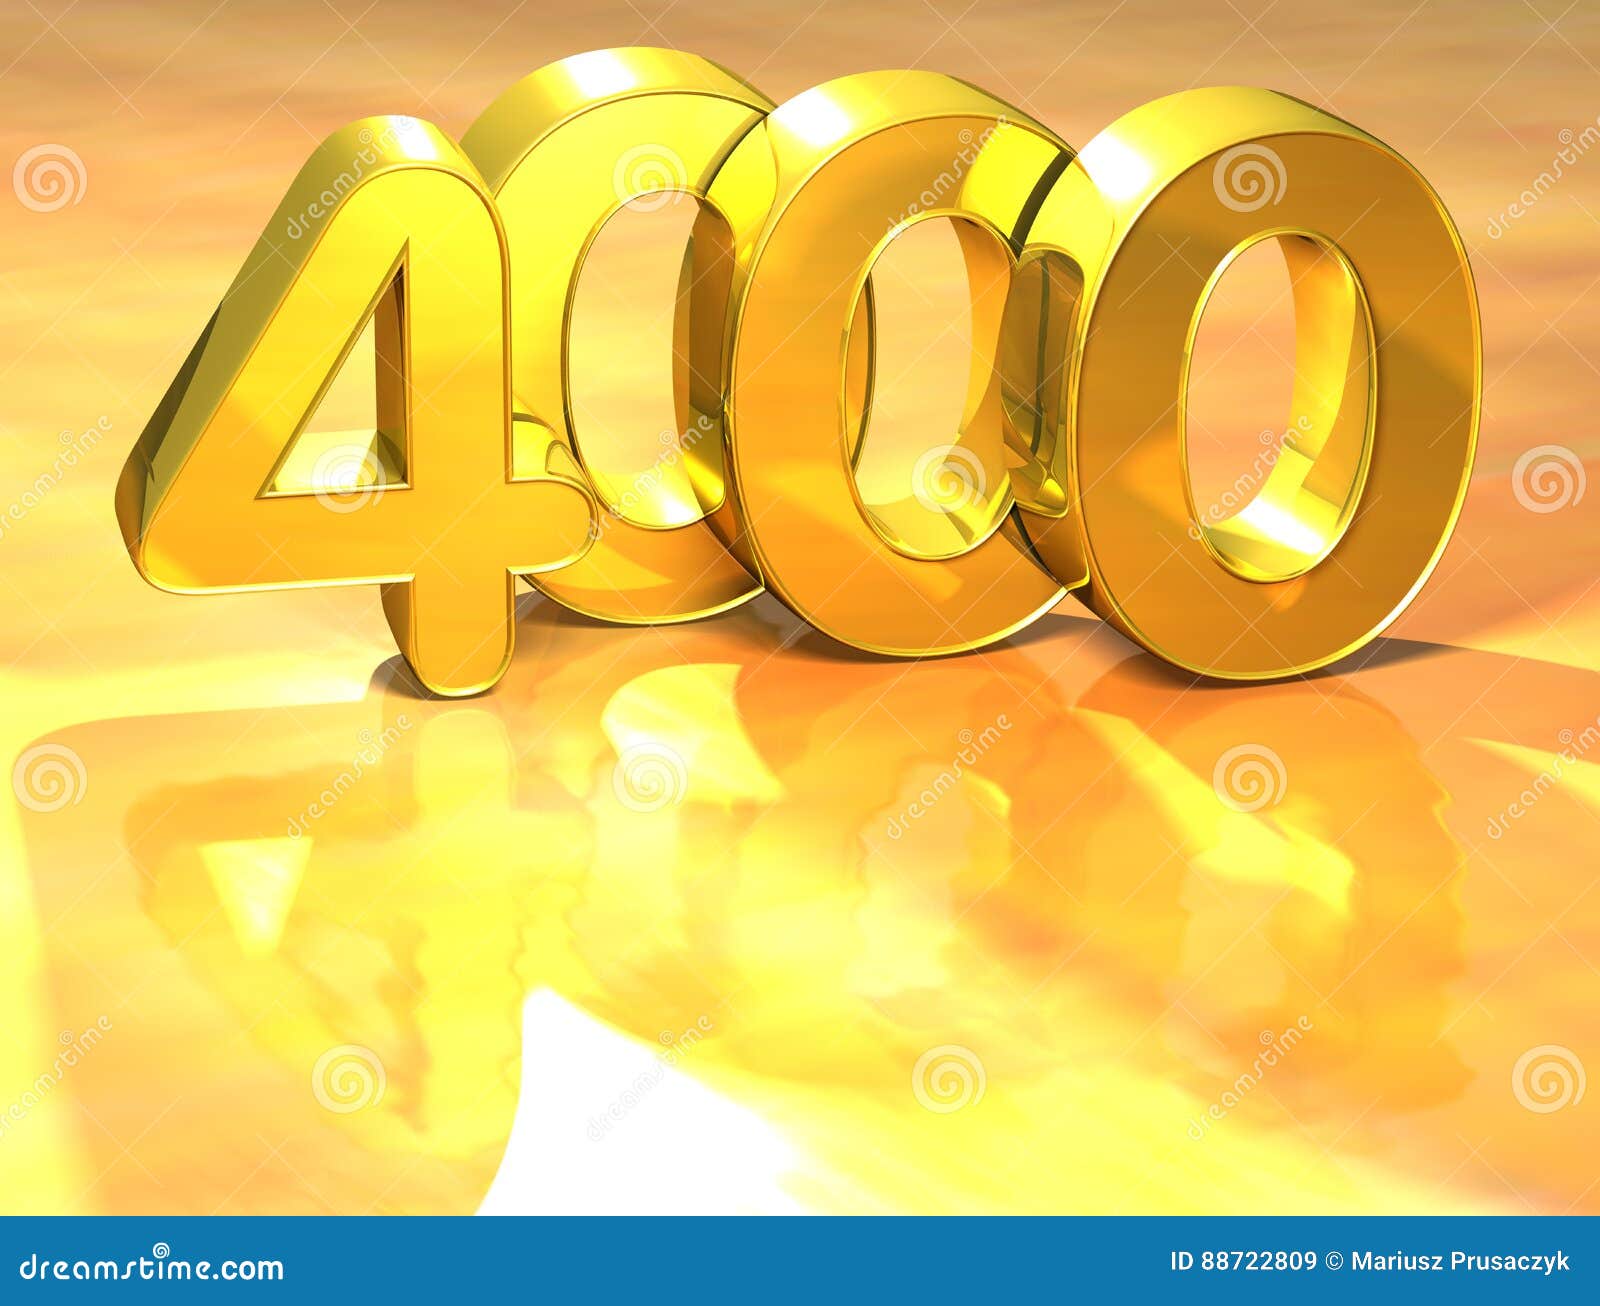 3D Gold Ranking Number 4000 On White Background. Stock ...